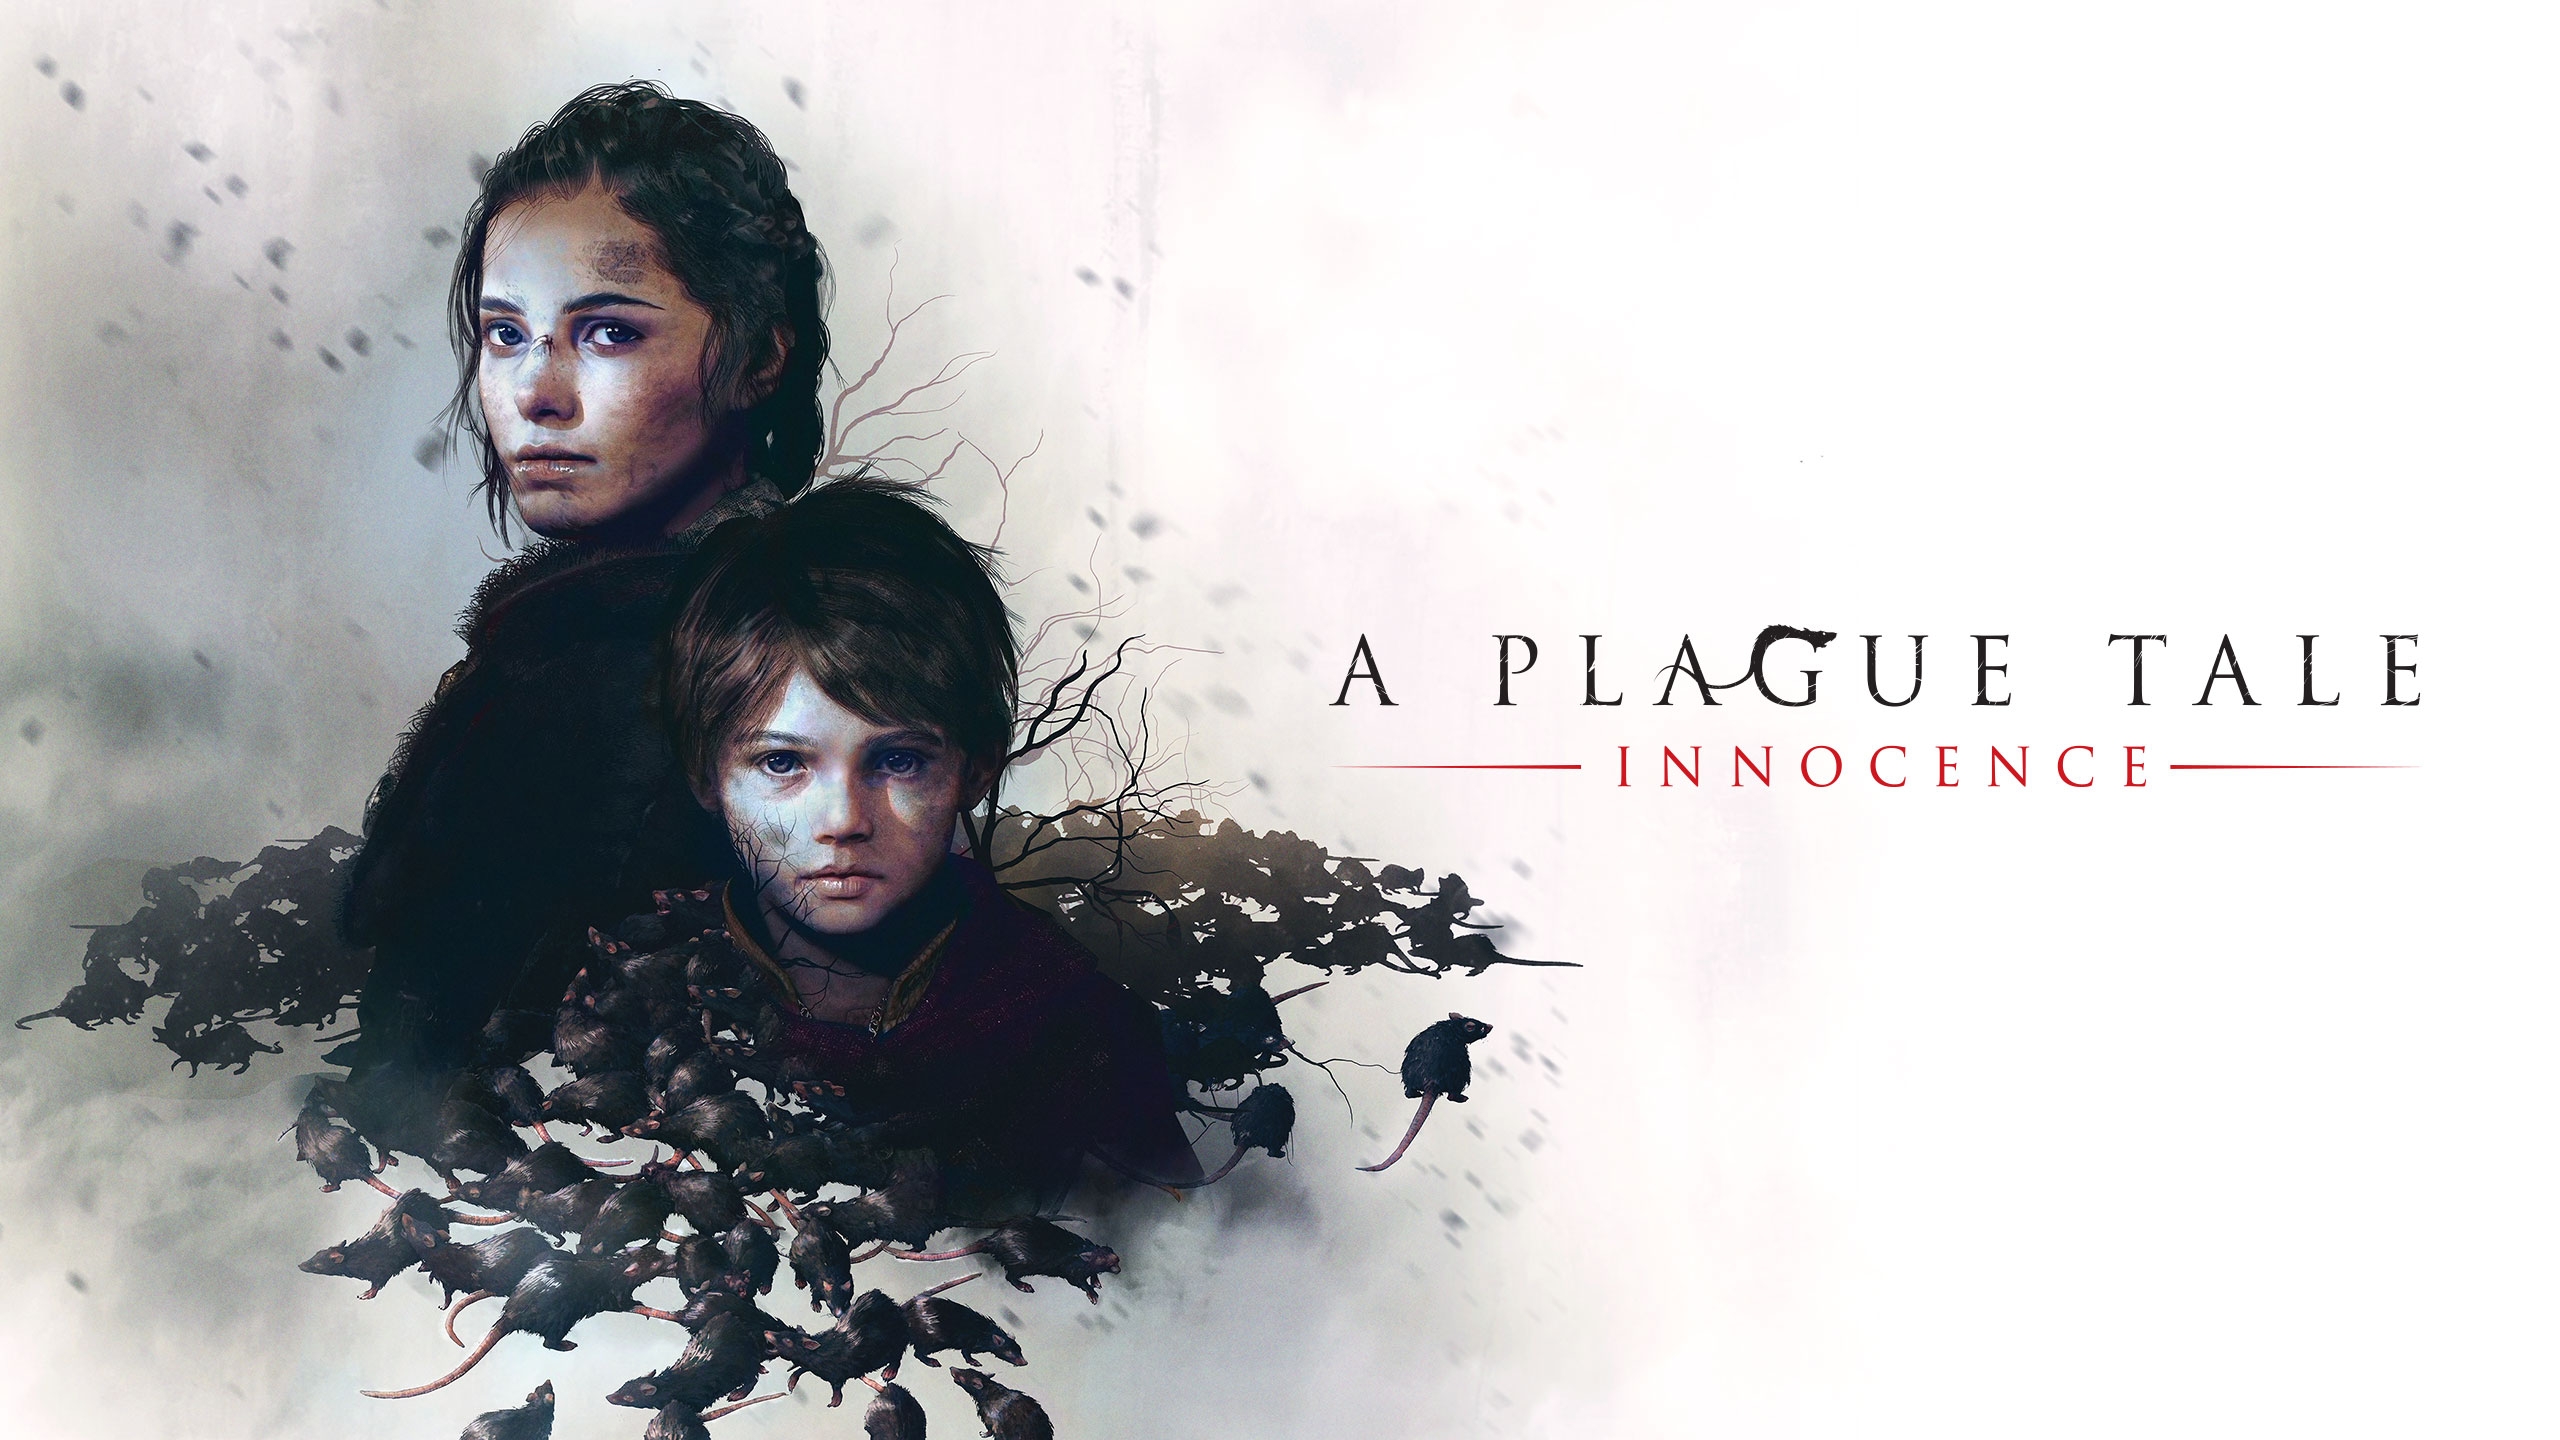 A Plague Tale: Requiem - Sony PlayStation 5 for sale online